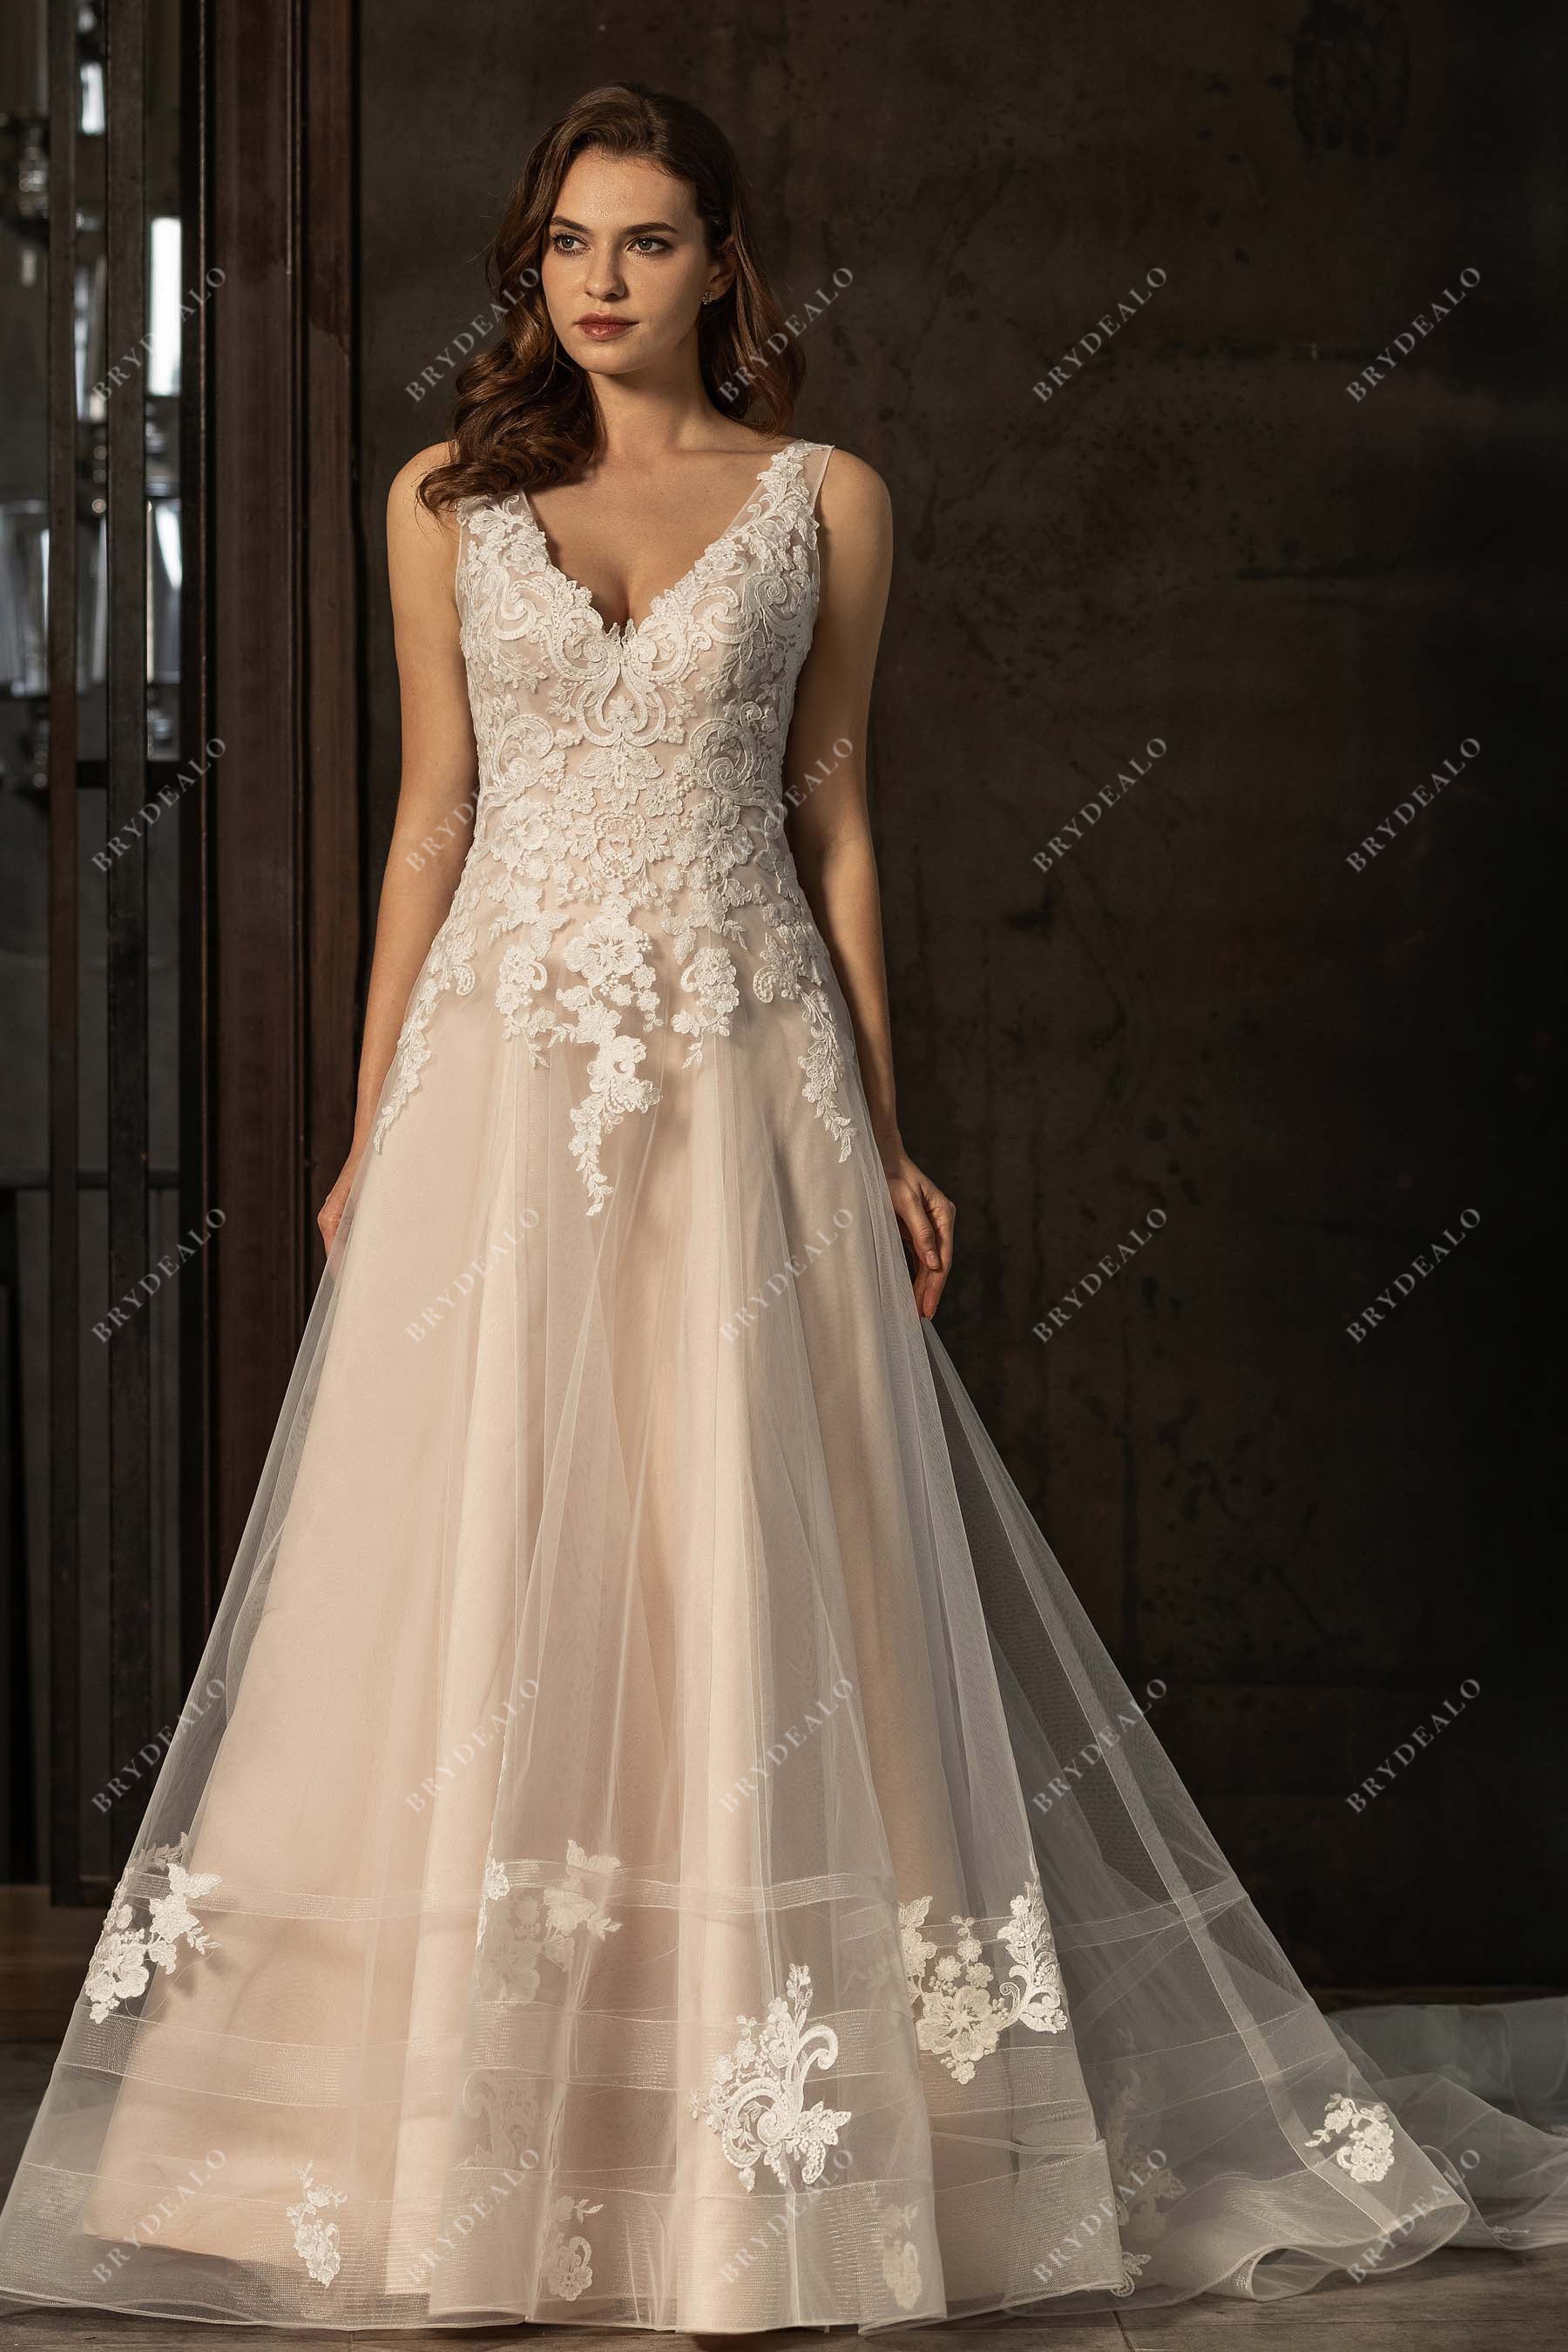 V-neck sleeveless appliqued tulle A-line wedding gown